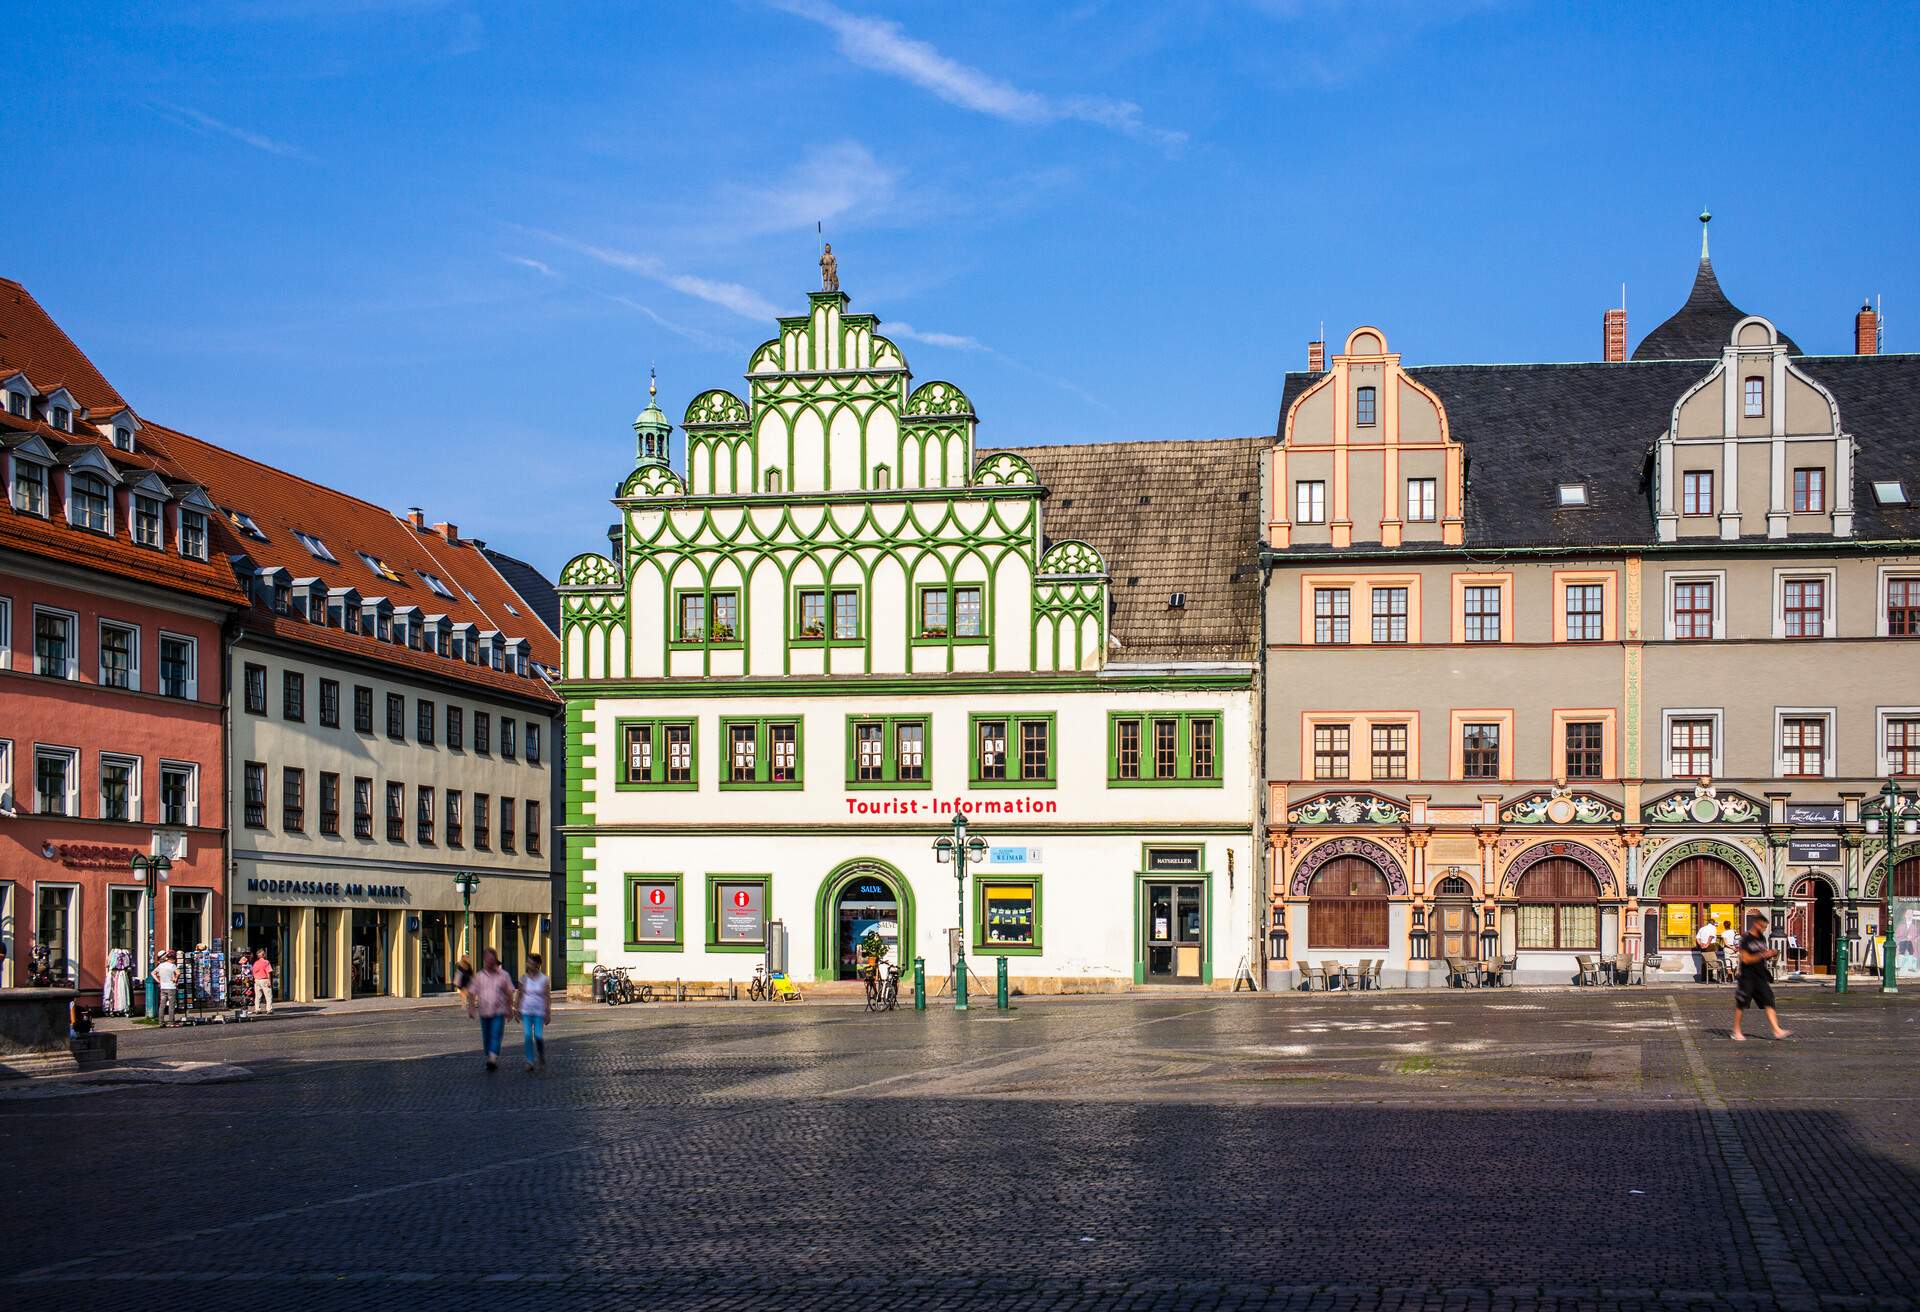 DEST_GERMANY_WEIMAR_TOWN SQUARE_GettyImages-1021714830